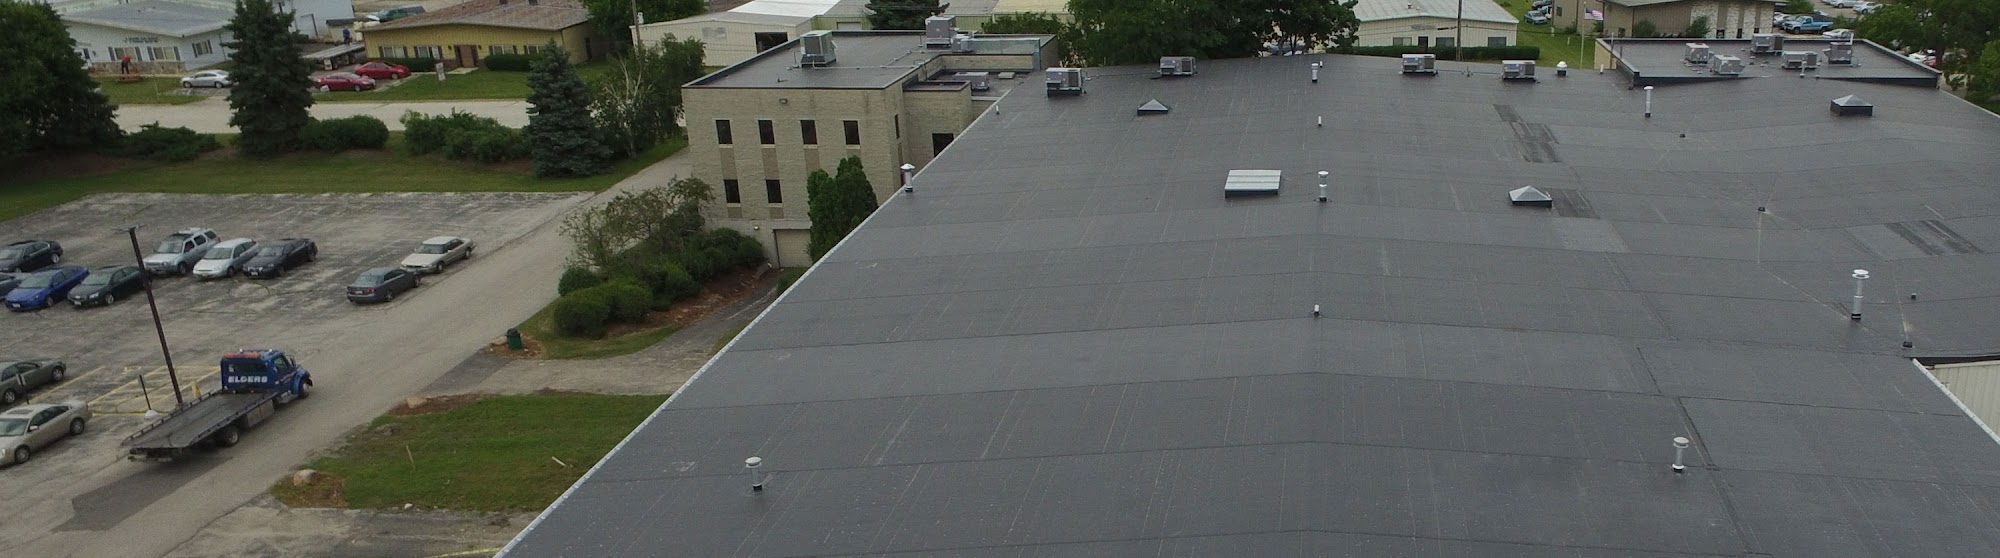 Commercial Roofing of Wisconsin, LLC